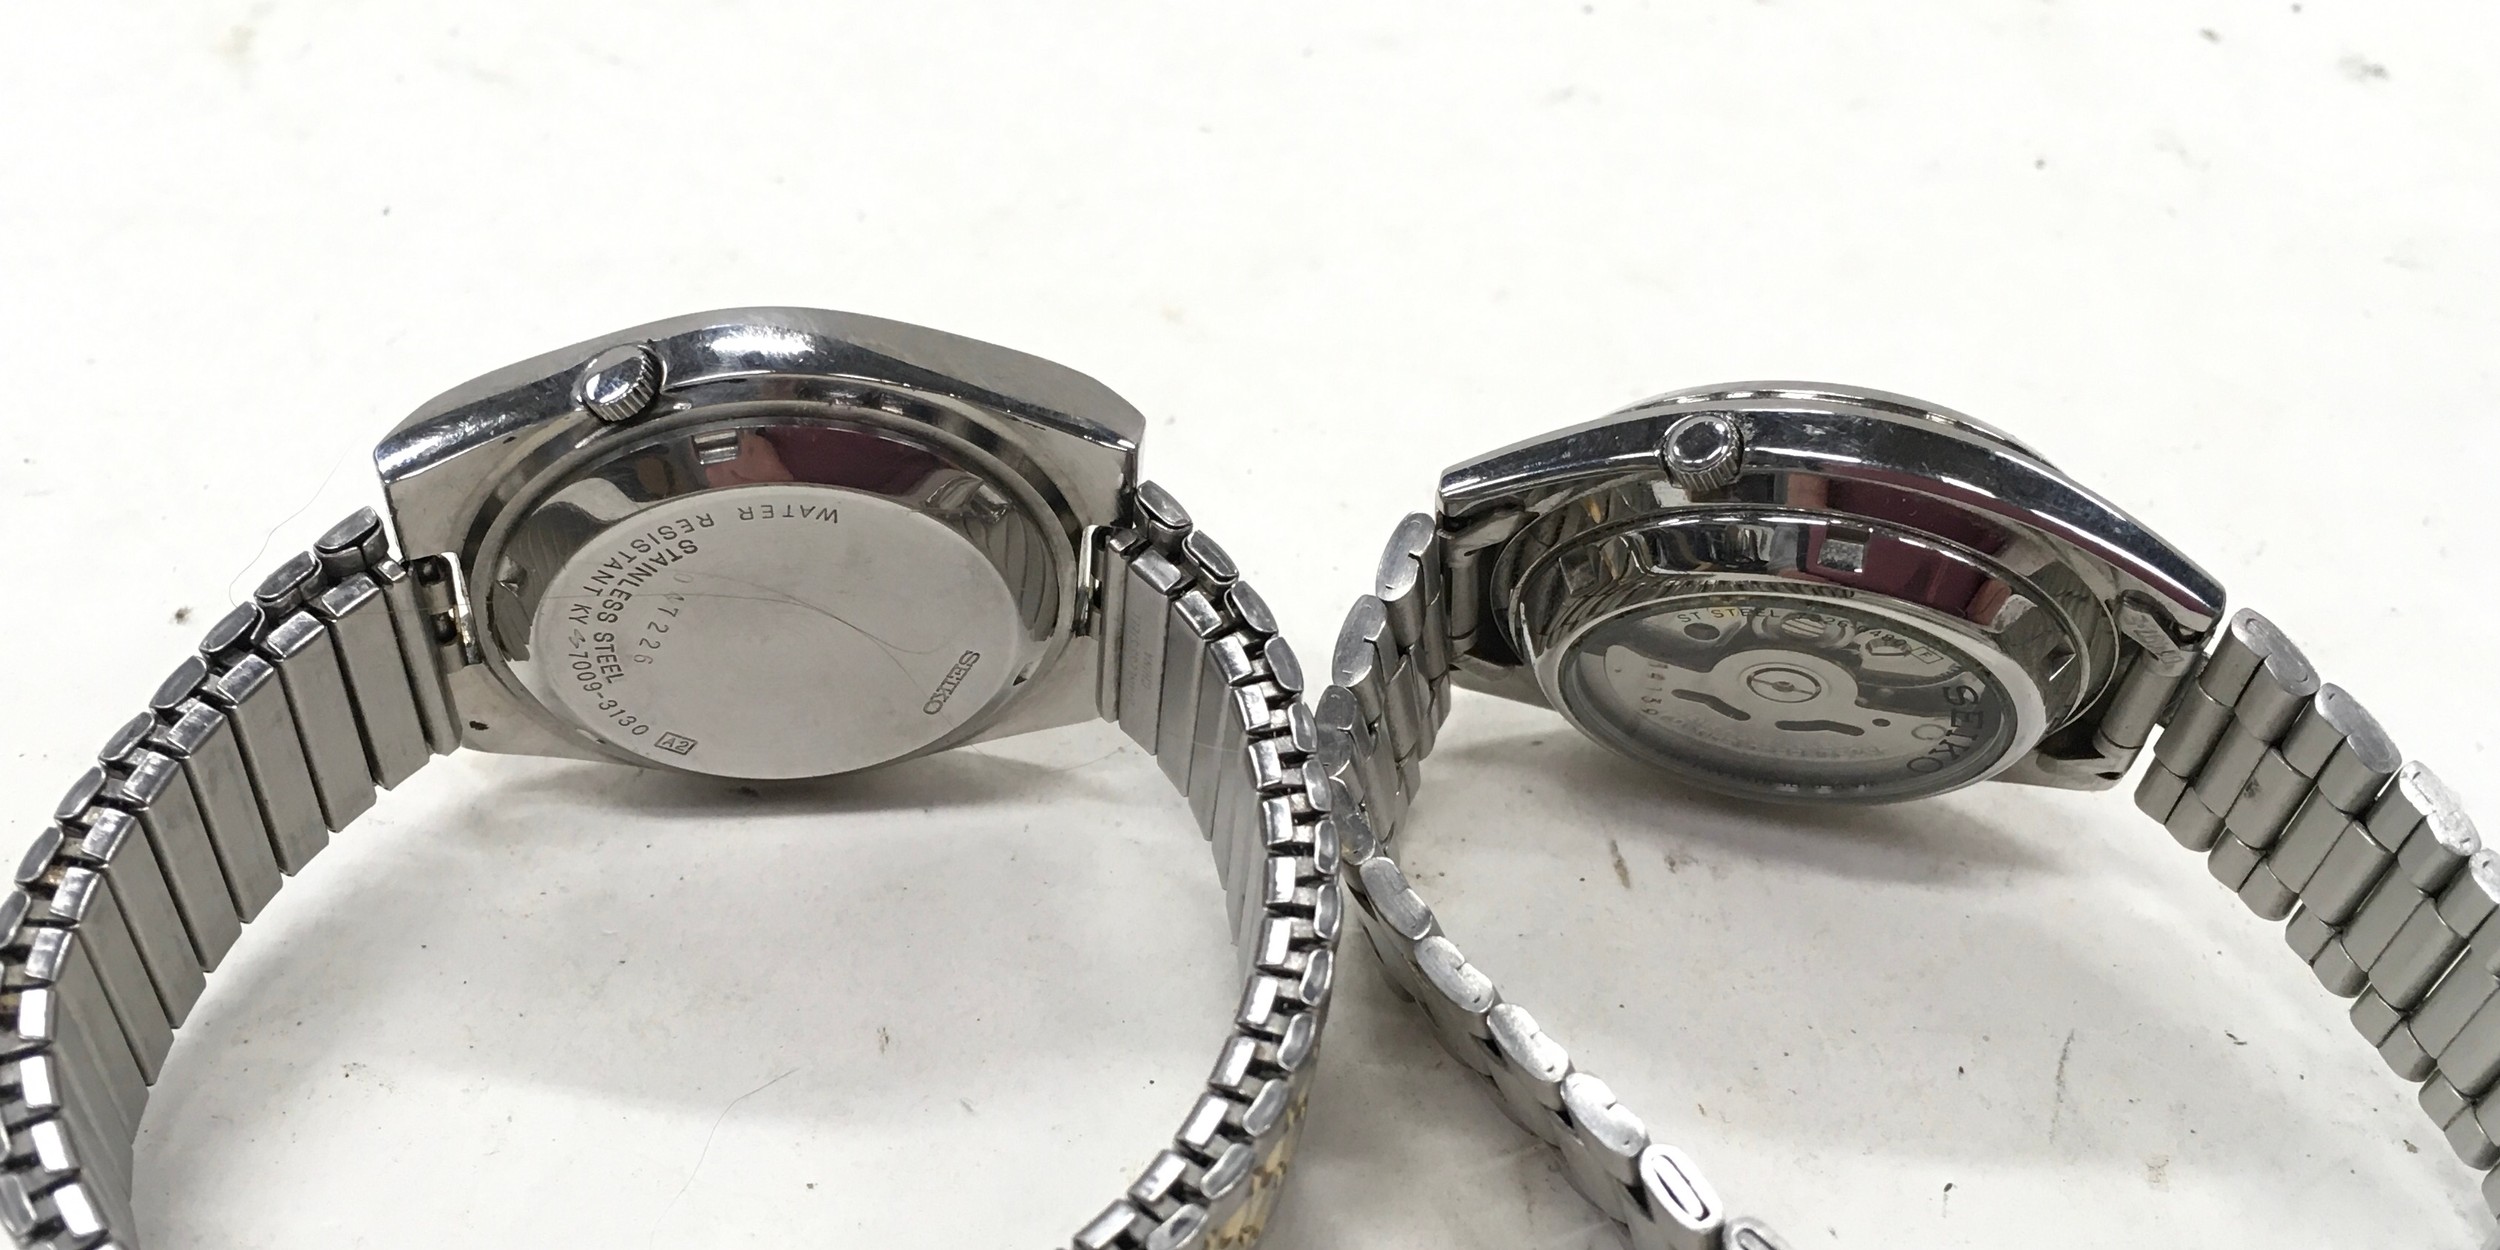 Collection of 4 vintage Seiko '5' gents watches. All seen working. 2 have aftermarket dials. - Image 7 of 7